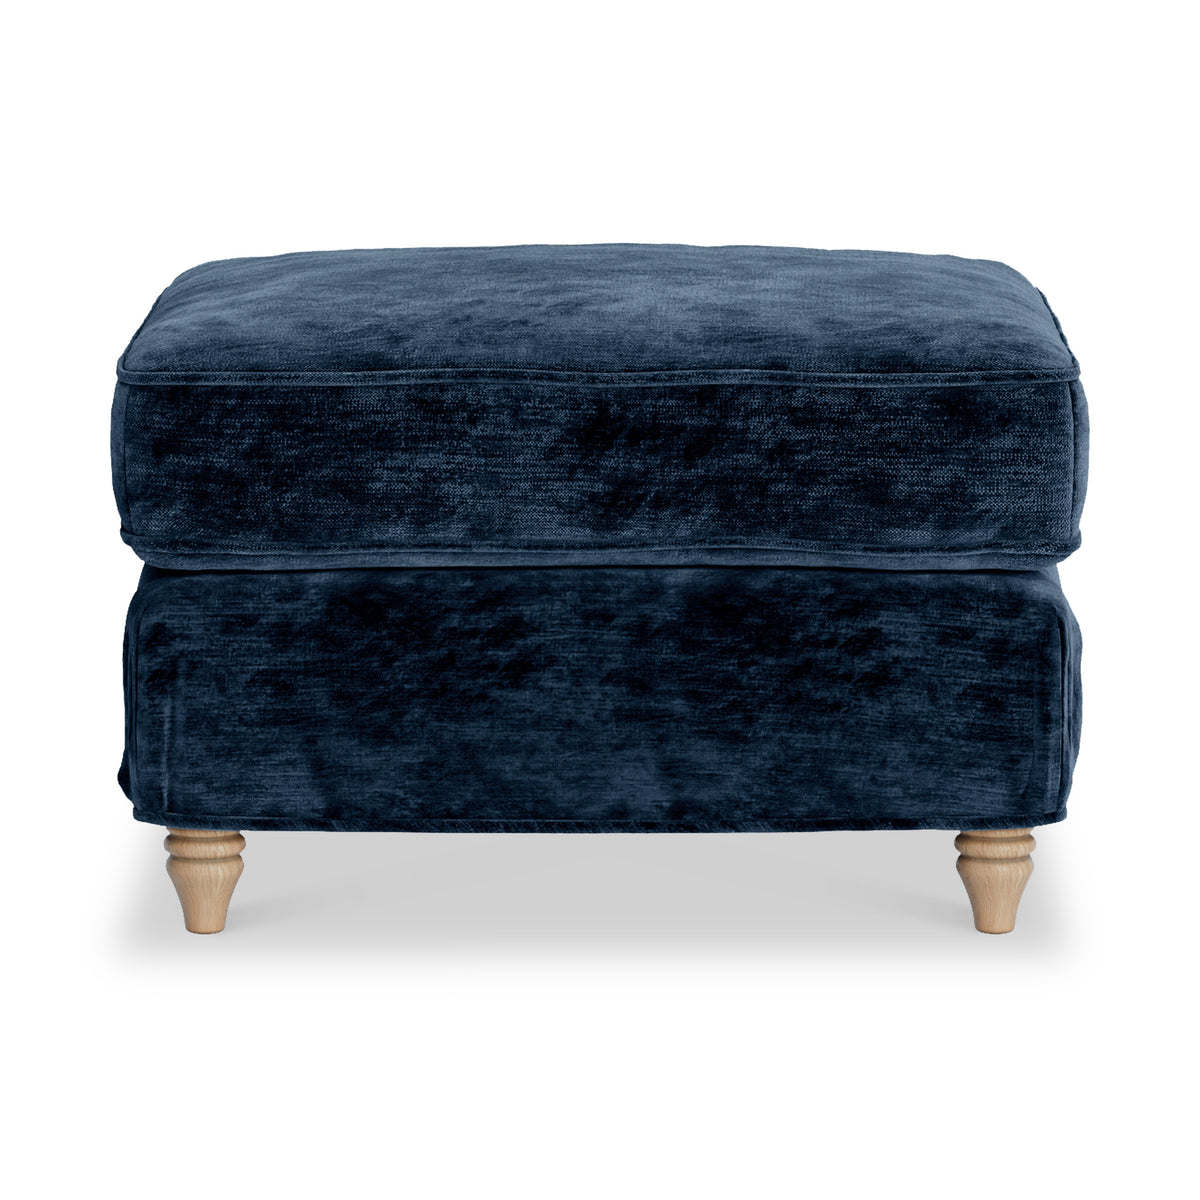 Alfie and Arthur Navy Universal Footstool from Roseland Furniture